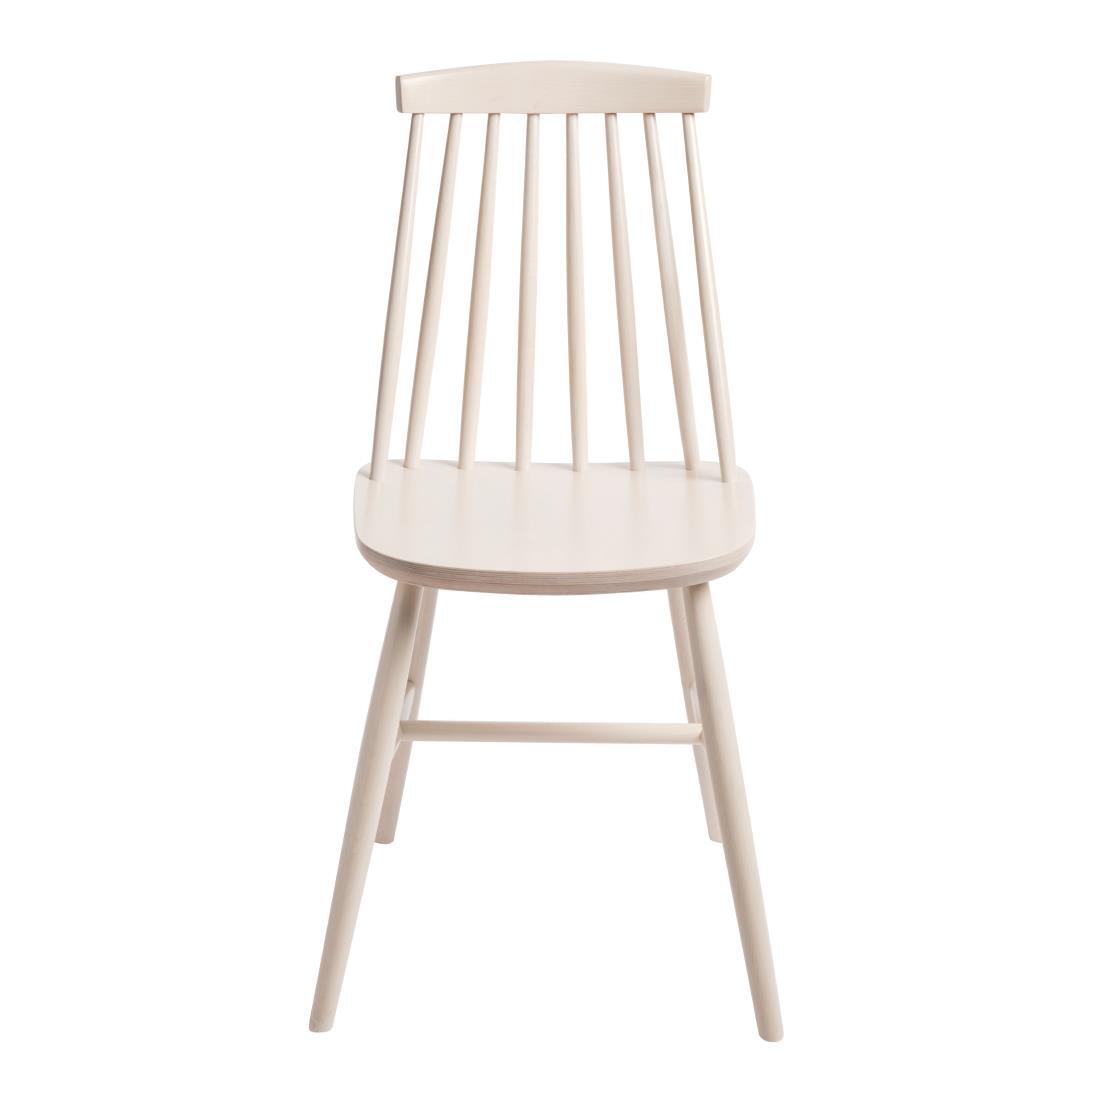 Fameg Farmhouse Angled Side Chairs White (Pack of 2) - DC354  - 3